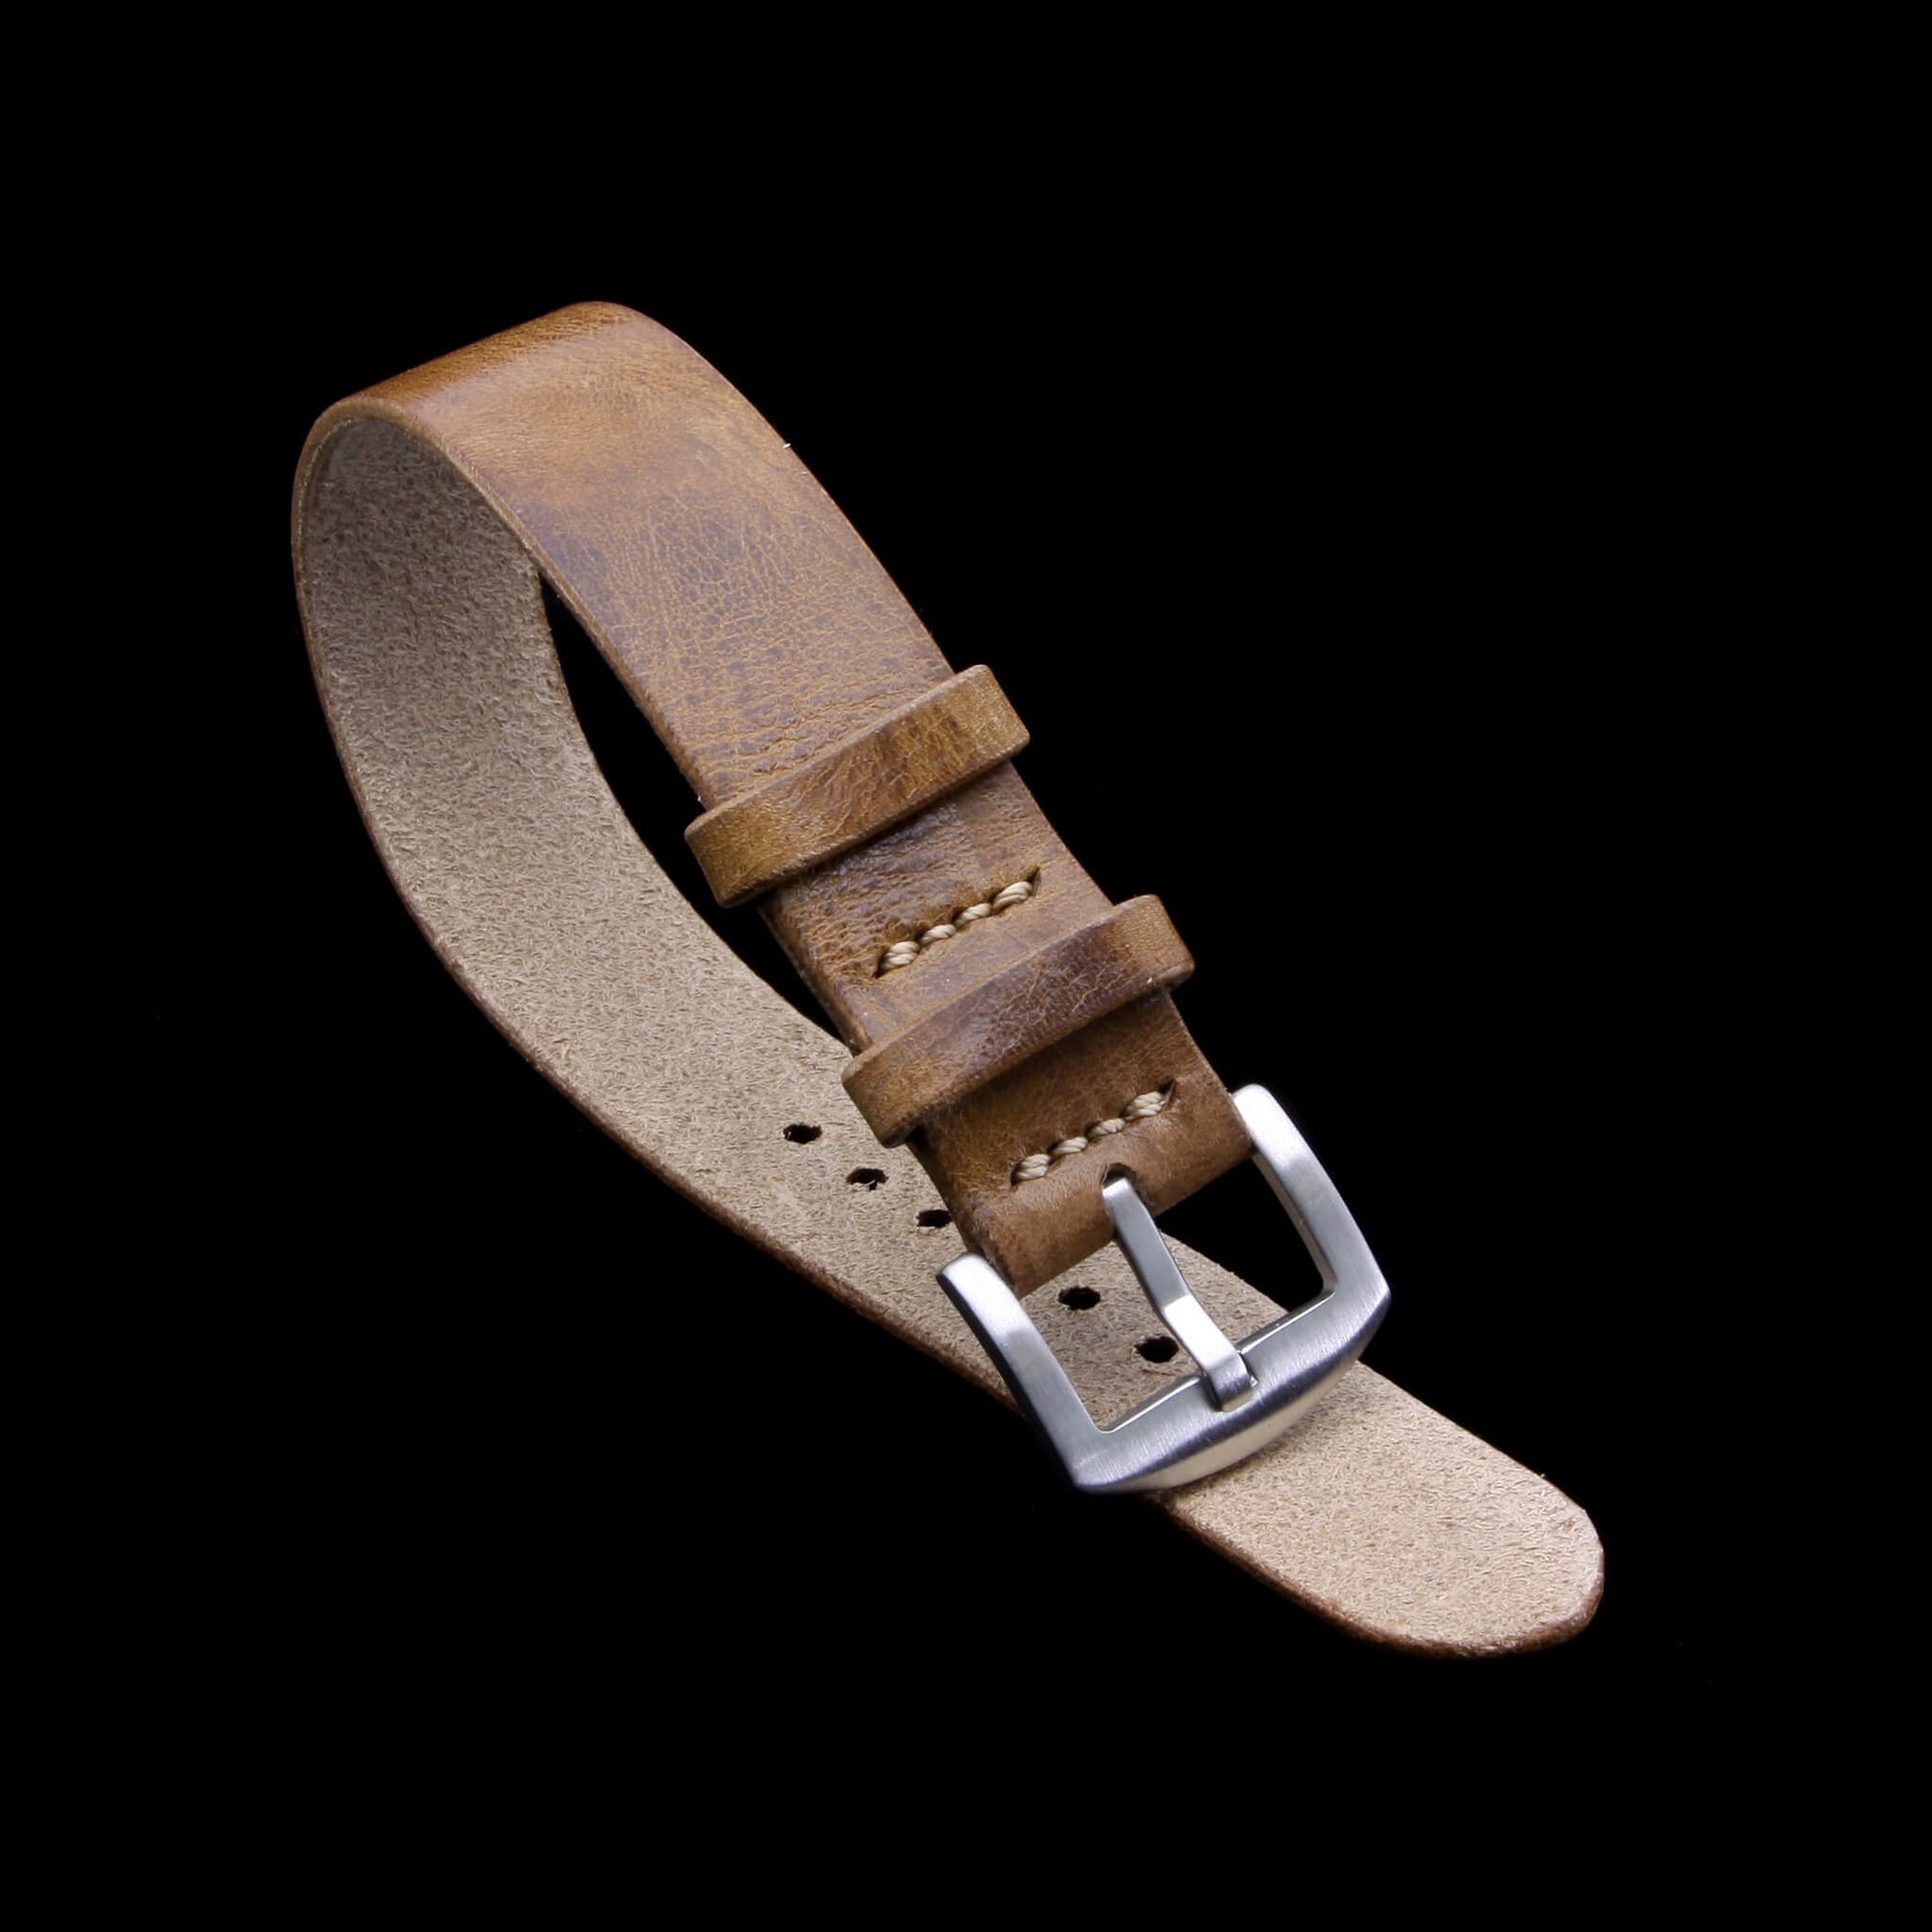 Single Pass Leather Watch Strap, 2-Keeper Military 102 | Full Grain Italian Vegetable-Tanned Leather | Cozy Handmade